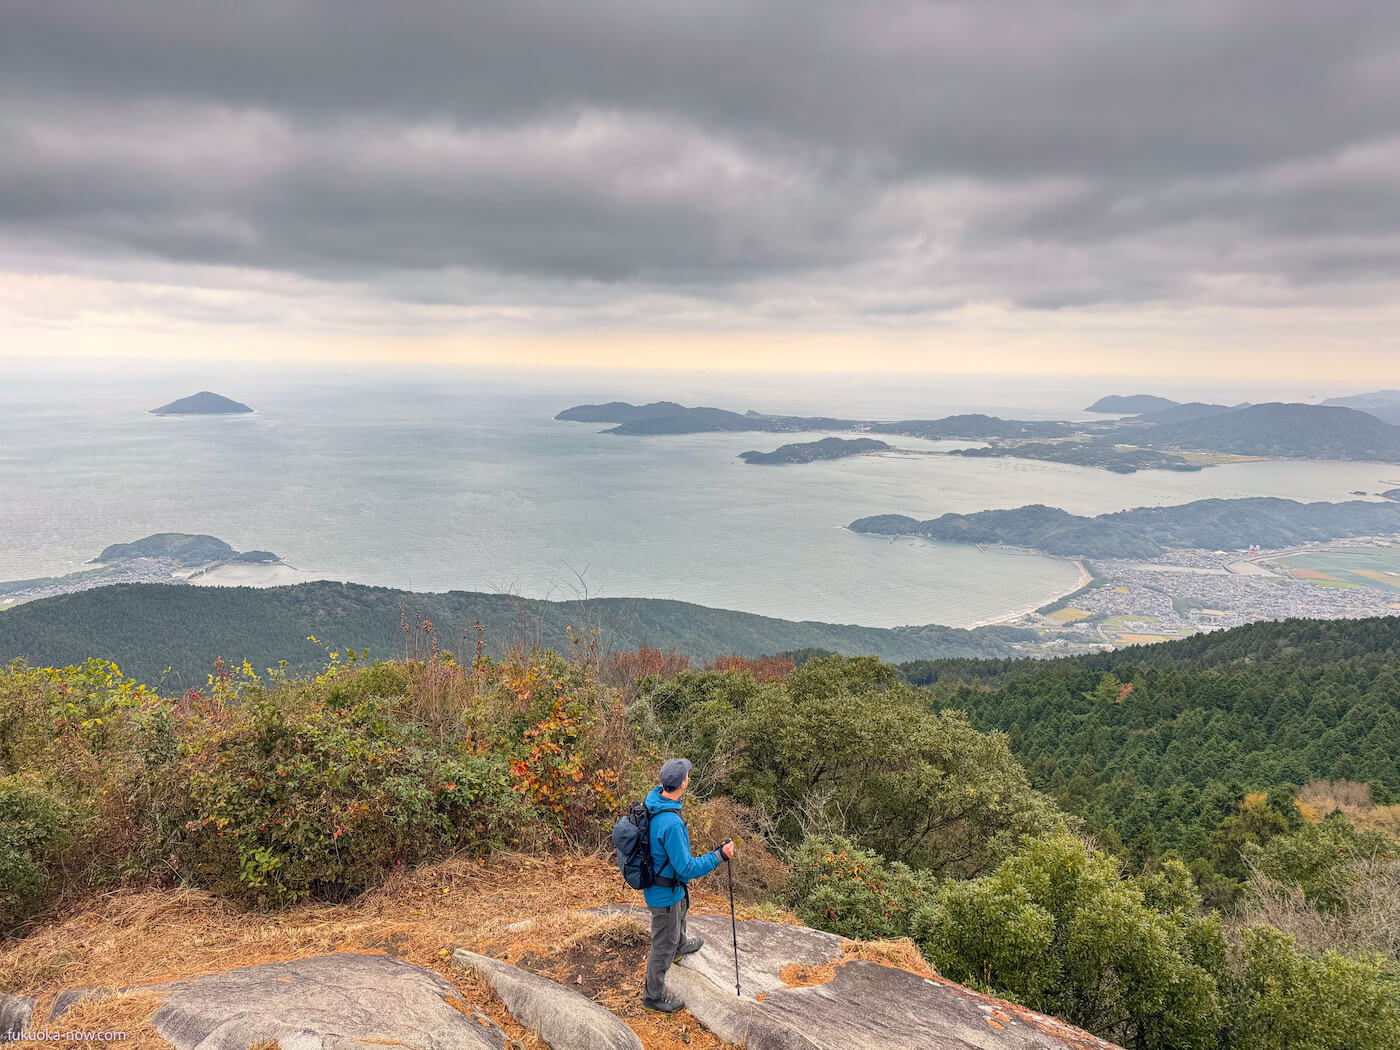 Itoshima's Best Hikes: Trails for Every Climber, 糸島の山を歩いて絶景を見にいこう